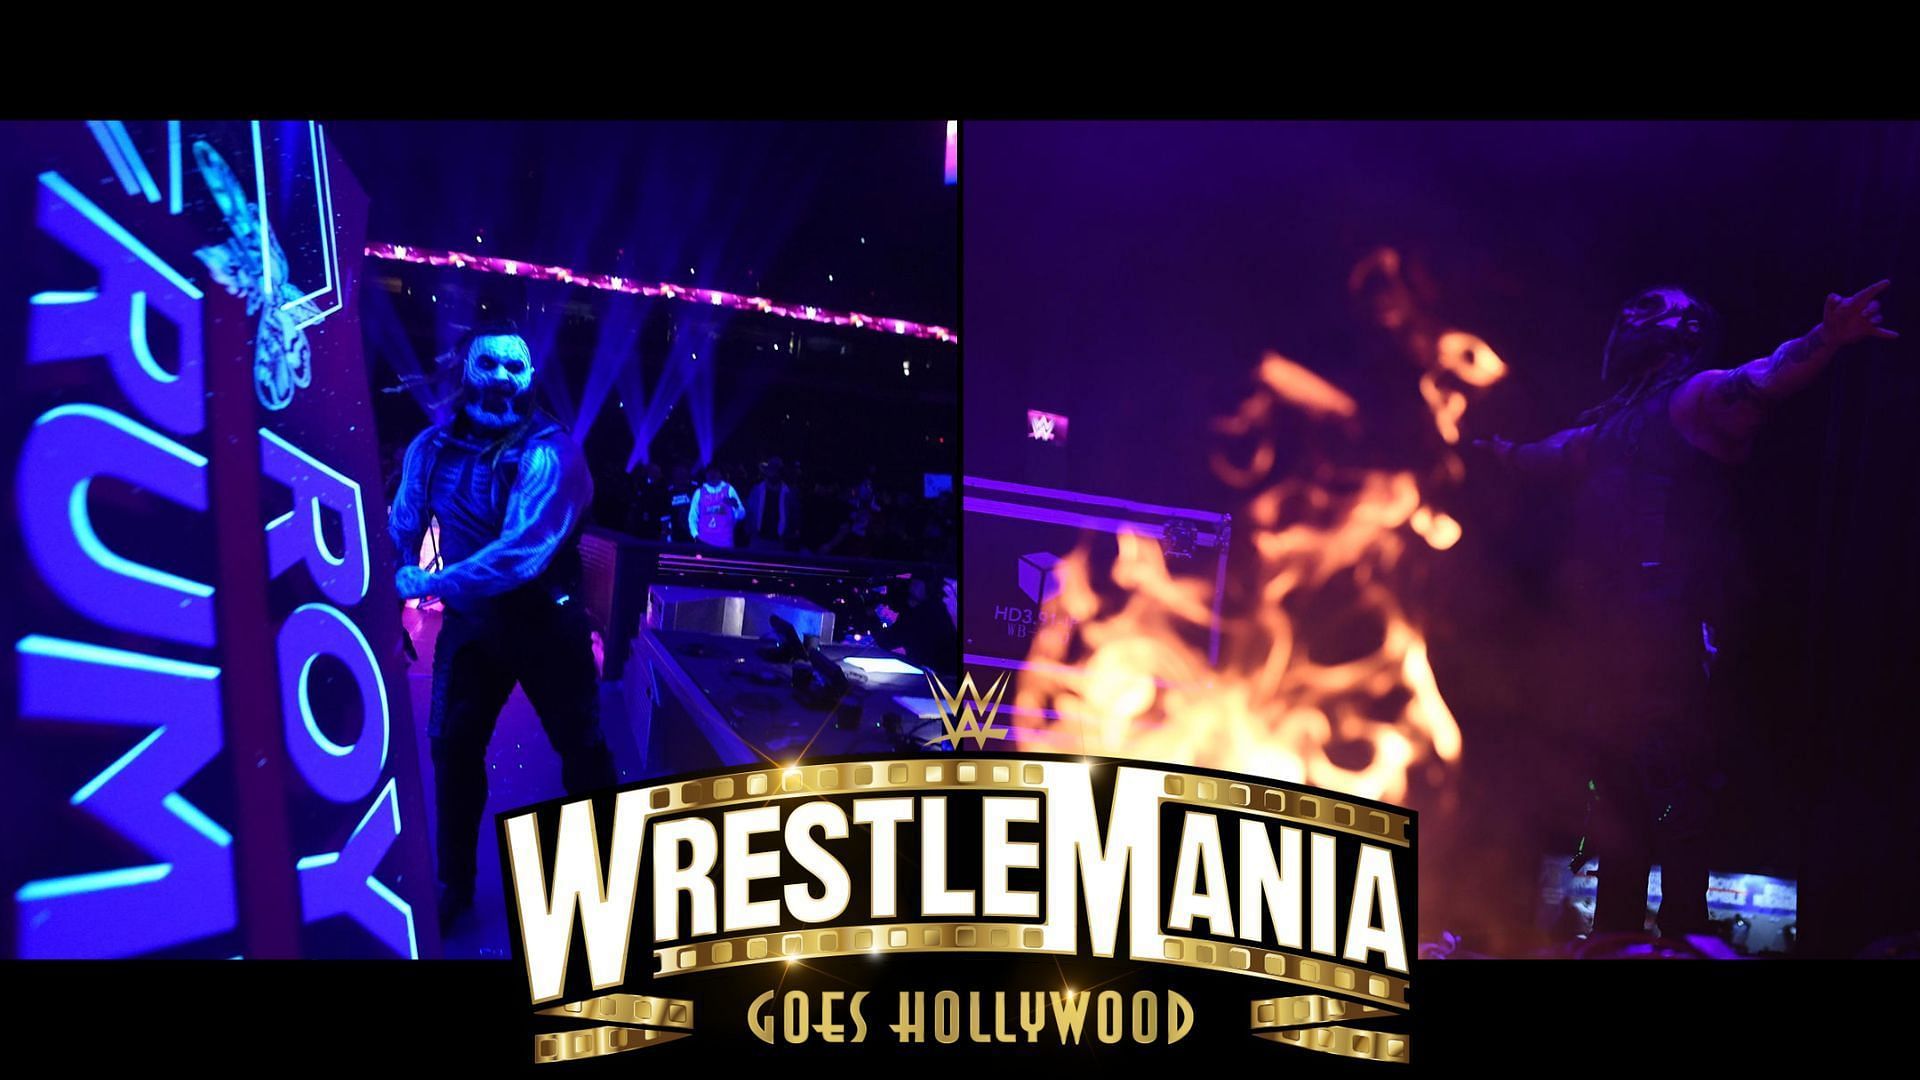 WWE has plans for another unique gimmick match at WrestleMania 39